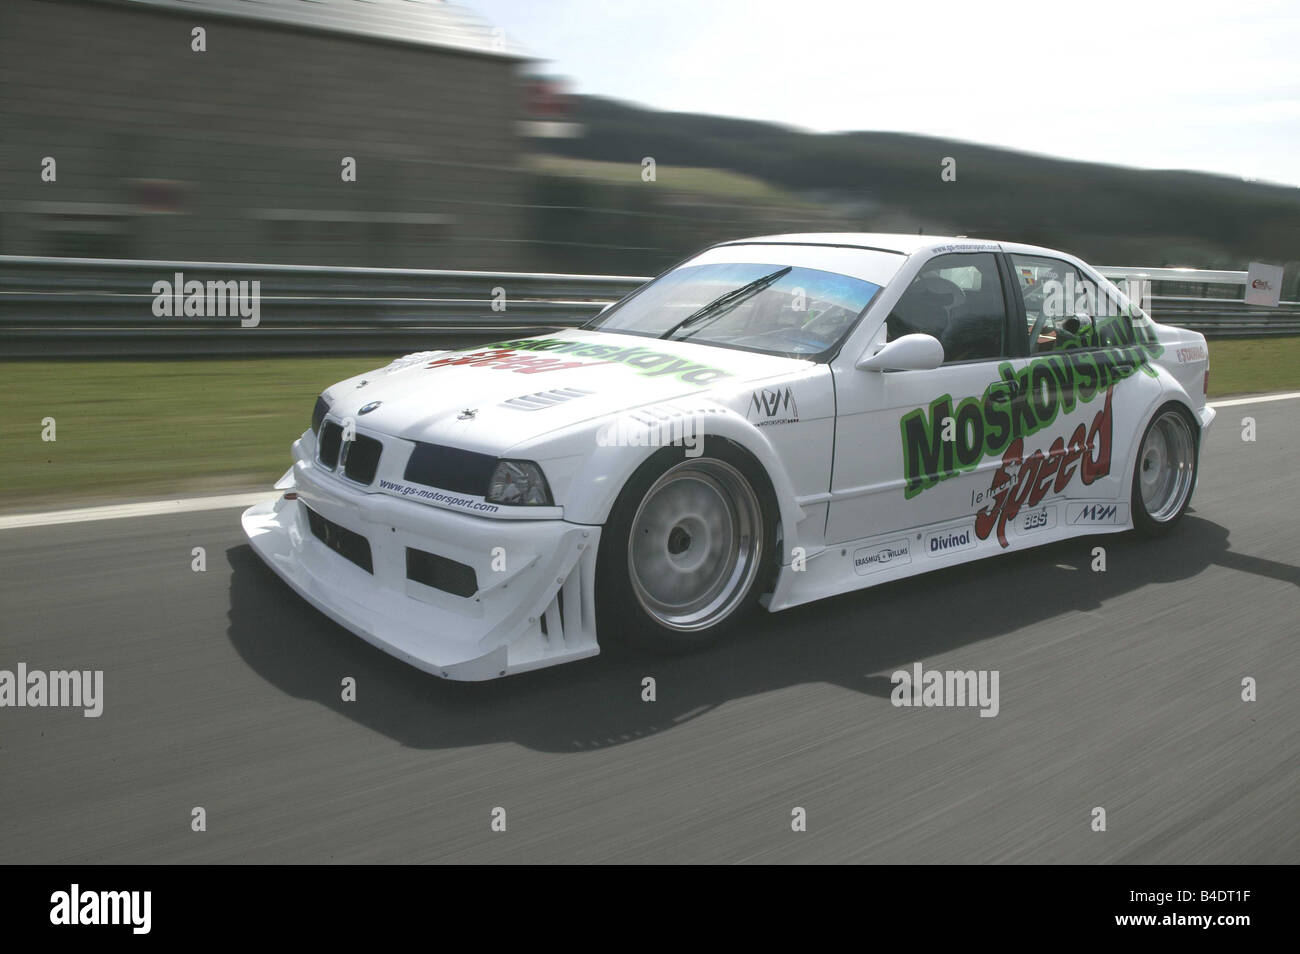 Car, BMW M2 GTR, white, diagonal from the front, side view, driving, race track, Test track Stock Photo